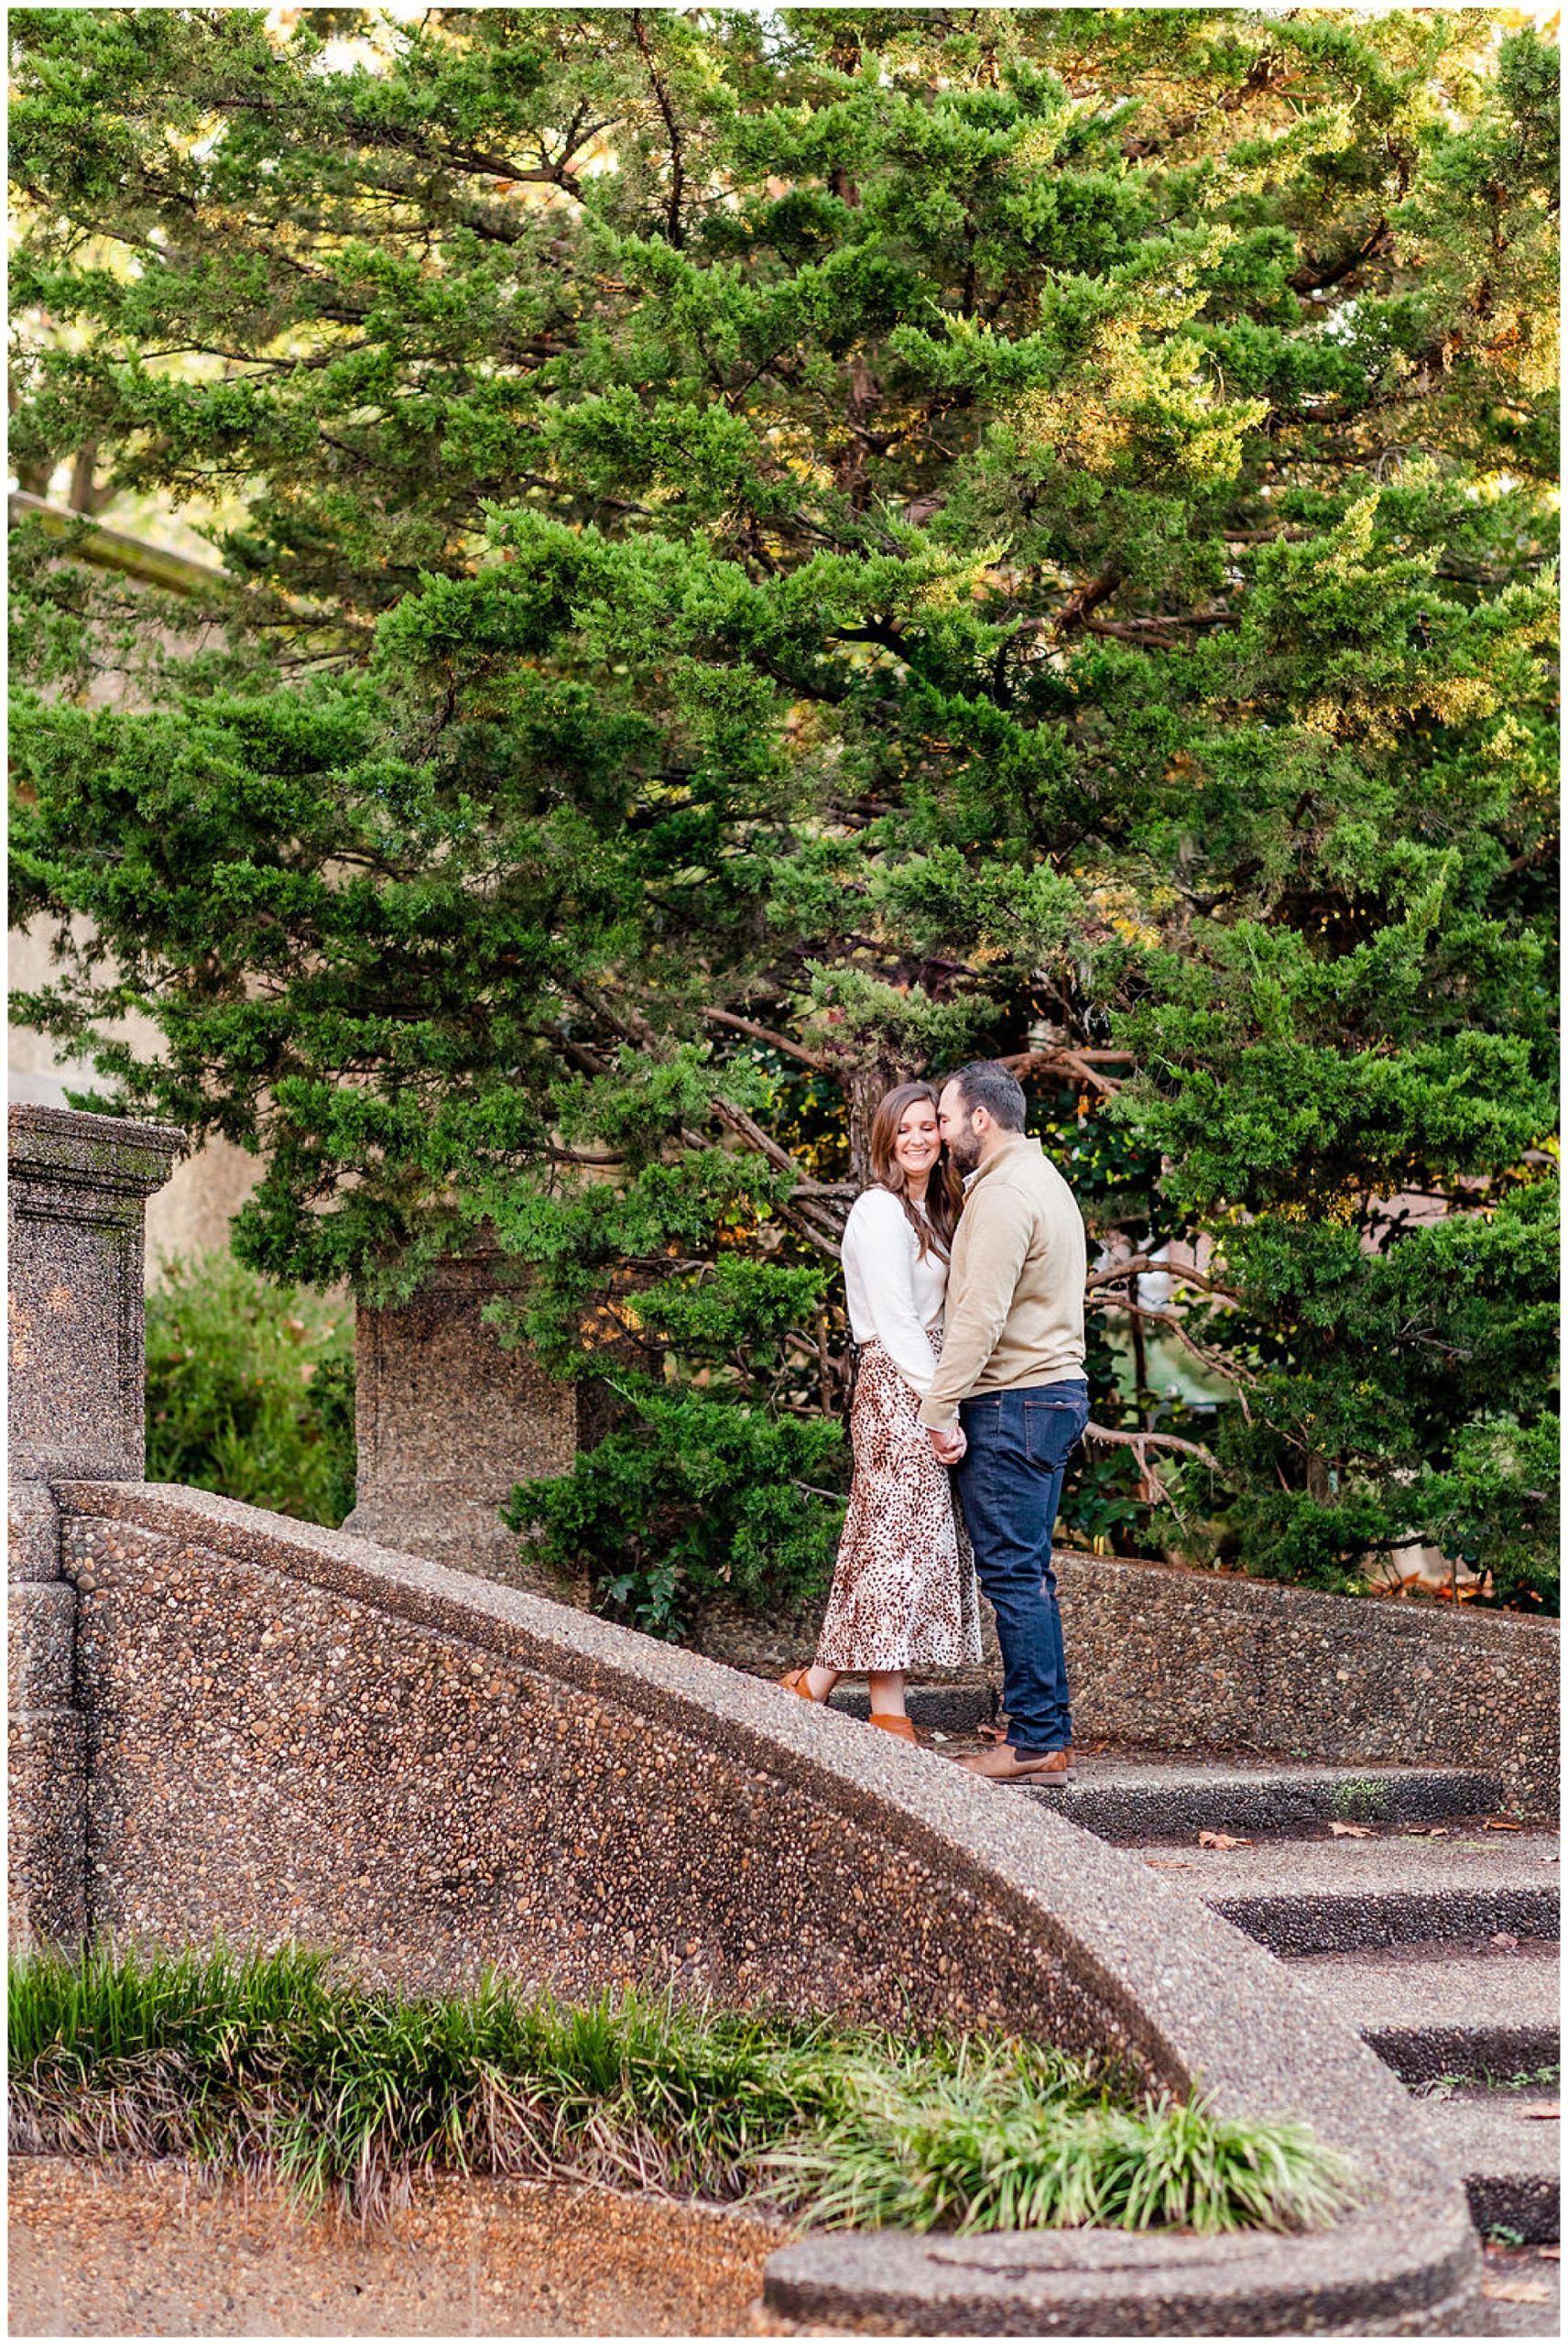 Meridian Hill Park engagement session, Meridian Hill Park DC, DC engagement photography, DC engagement photos, DC engagement session, DC engagement photographer, DC proposal photographer, DC wedding photographer, autumn engagement photos, Rachel E.H. Photography, man kissing womans cheek, couple on stone staircase, white turtleneck